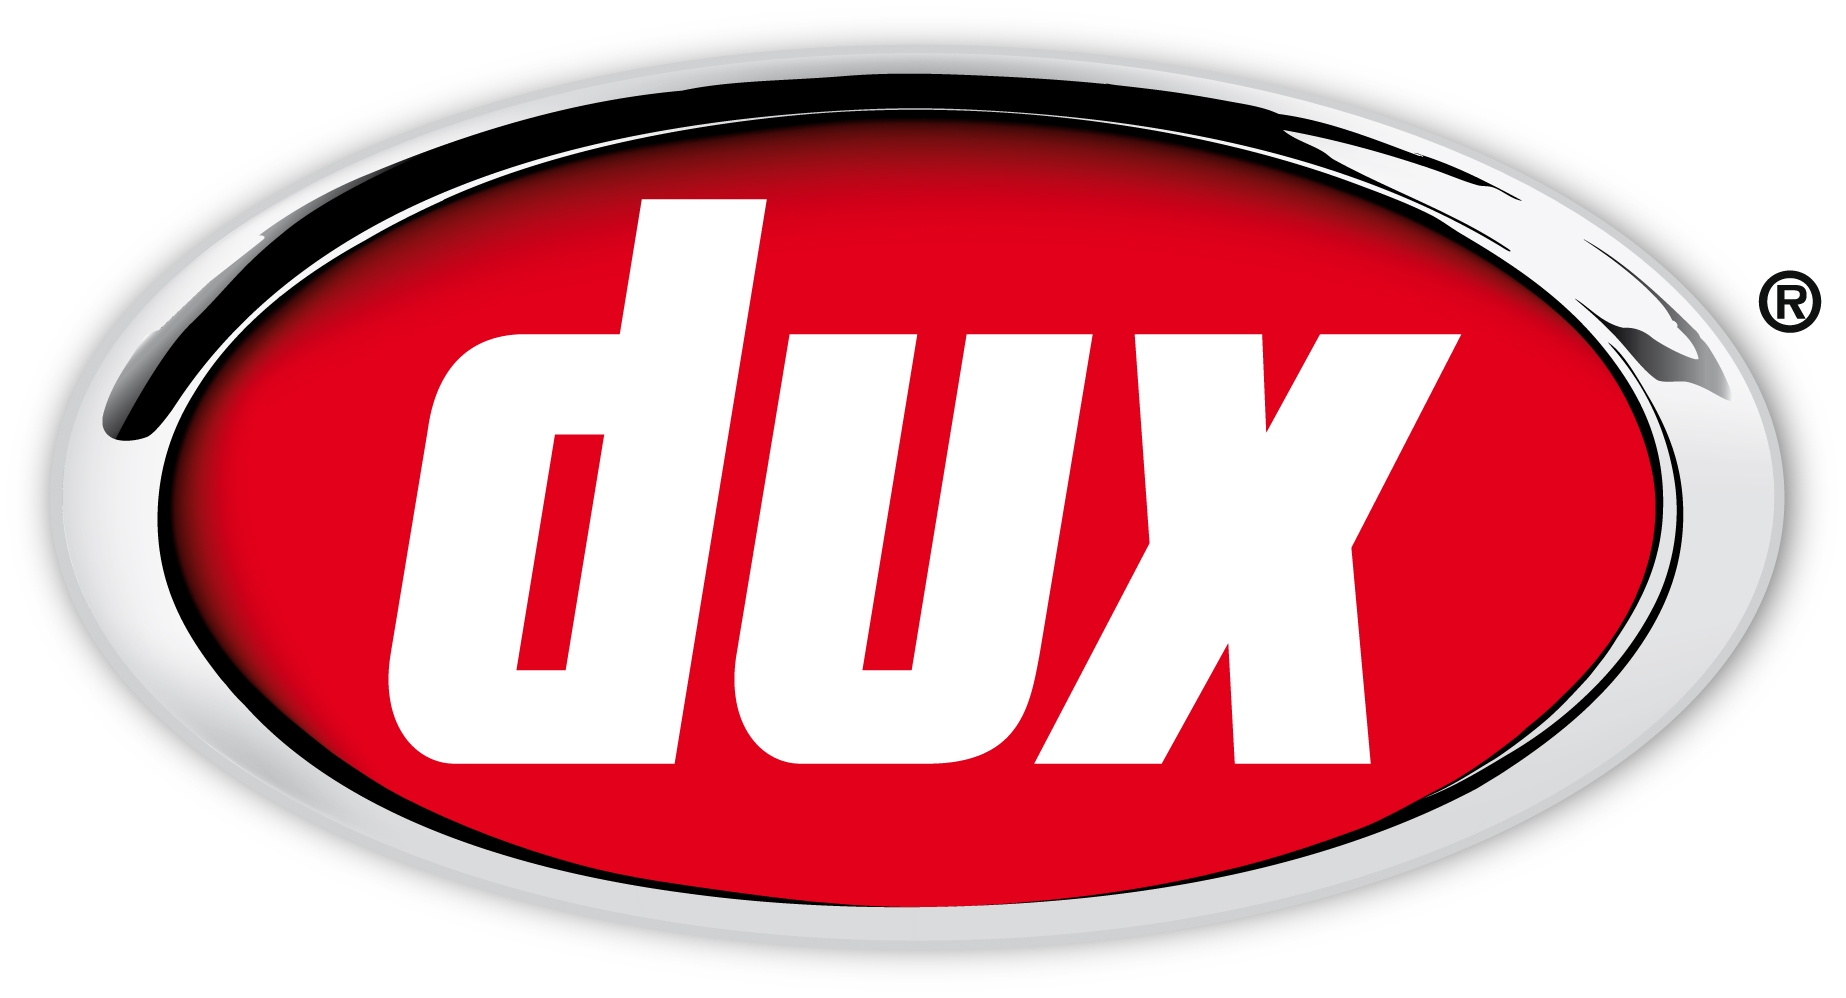 dux hot water systems